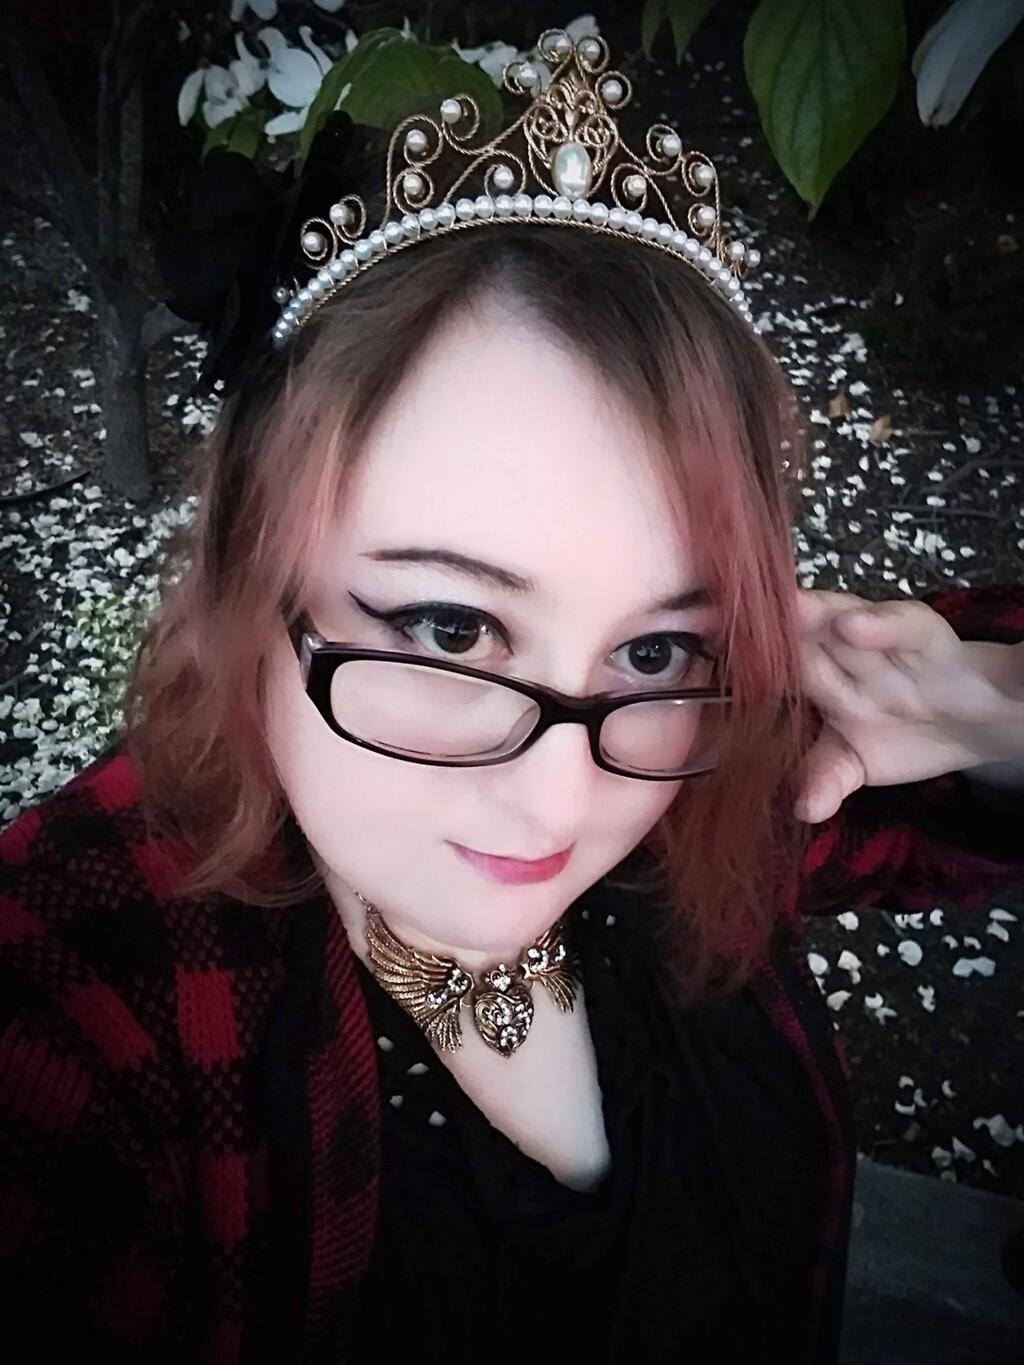 LAUREL GALLOWAY. 2018 Laurel Galloway, one of the planners of the Hella Gay Prom themed OUT-er Space.in Sebastopol. She is wearing the tiara she'll wear to the prom (her first). It was a gift from the Antique Society in Sebastopol. Queer Prom, as it is also affectionately known, is hosted by Positive Image, a Santa Rosa nonprofit organization that provides services to LGBTQ youth aged 12 to 24. All are invited to the prom, which is sober, scent-free and chaperoned by nearly two dozen volunteers, many of them parents of the kids attending.